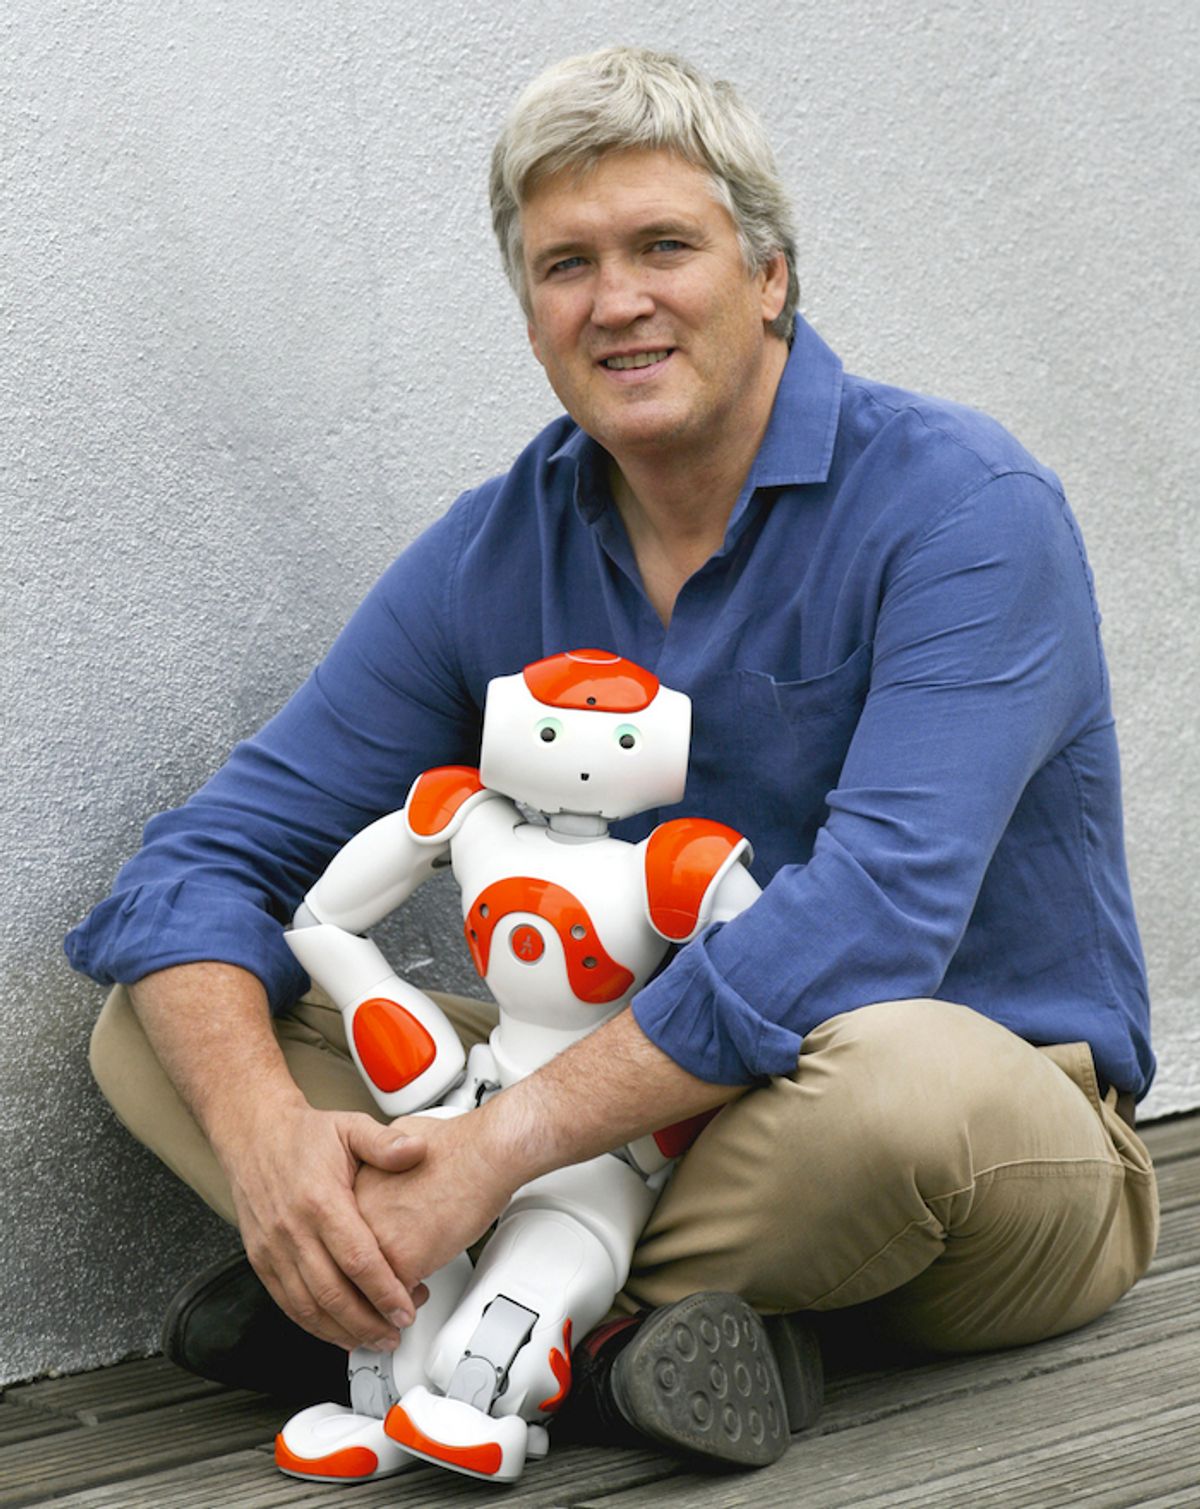 Aldebaran Robotics Founder and CEO Steps Down, SoftBank Appoints New Leader